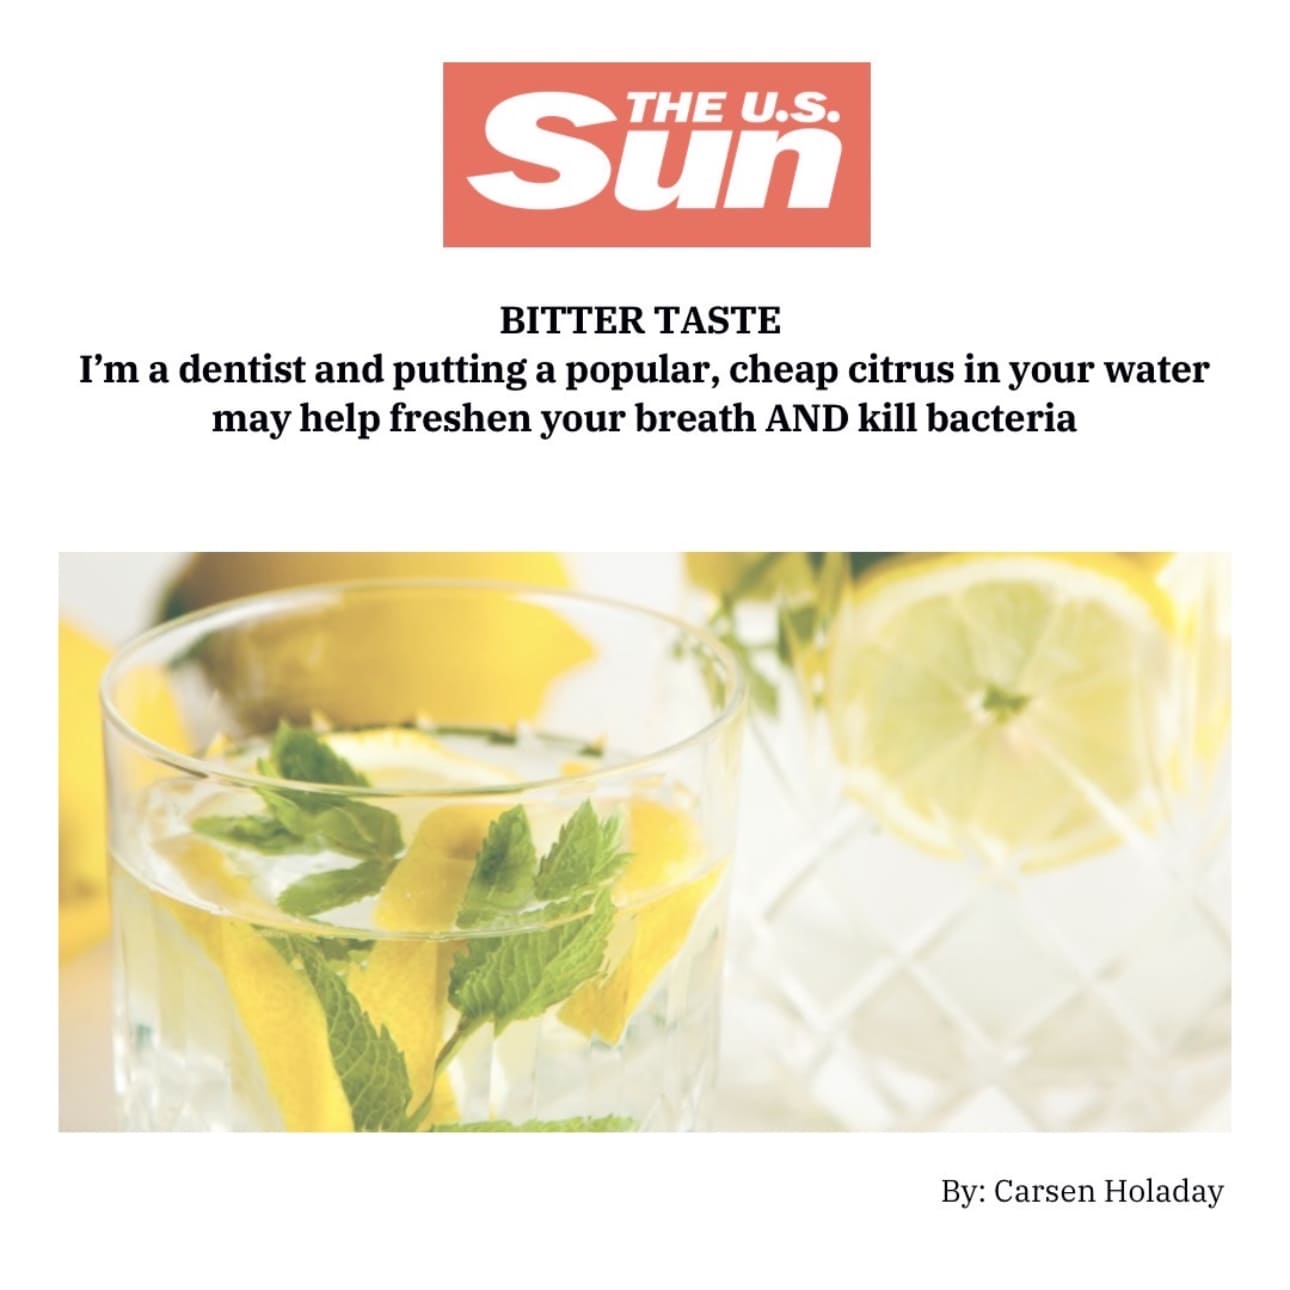 BITTER TASTE I’m a dentist and putting a popular, cheap citrus in your water may help freshen your breath AND kill bacteria